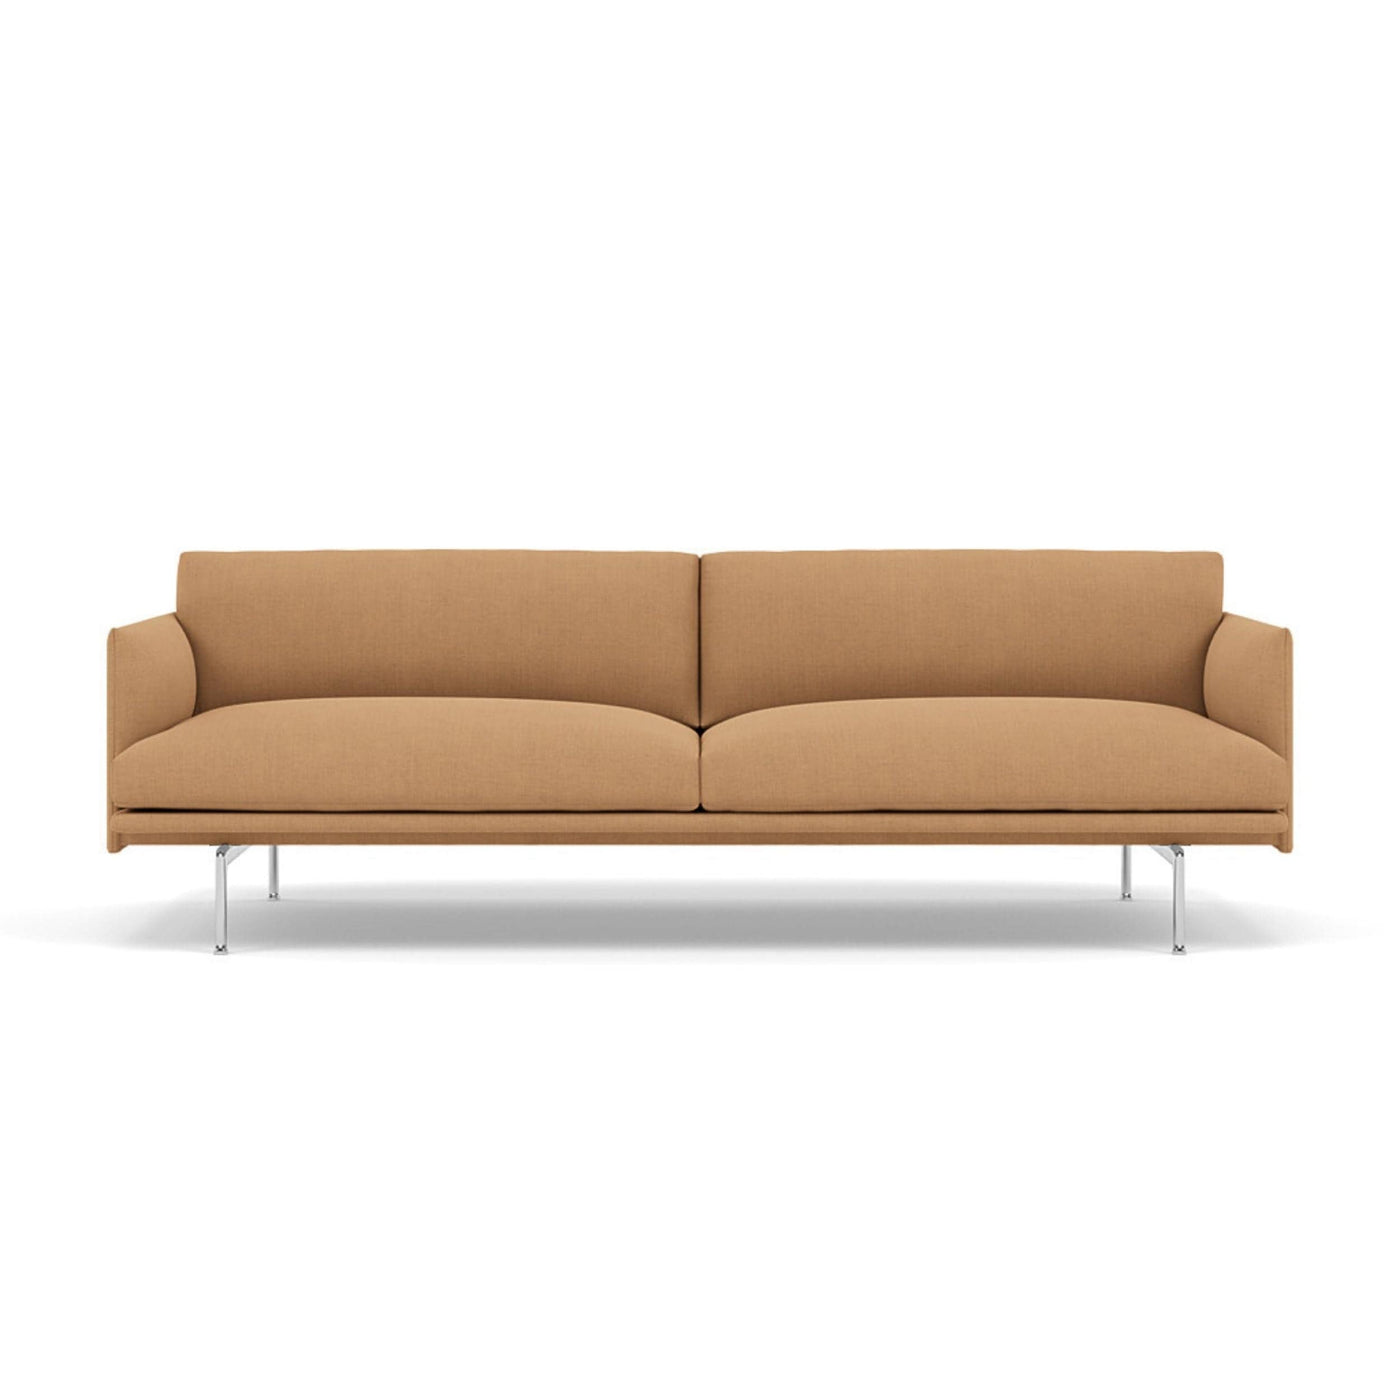 Muuto outline 3 seater sofa with polished aluminium legs. Made to order from someday designs. #colour_fiord-451